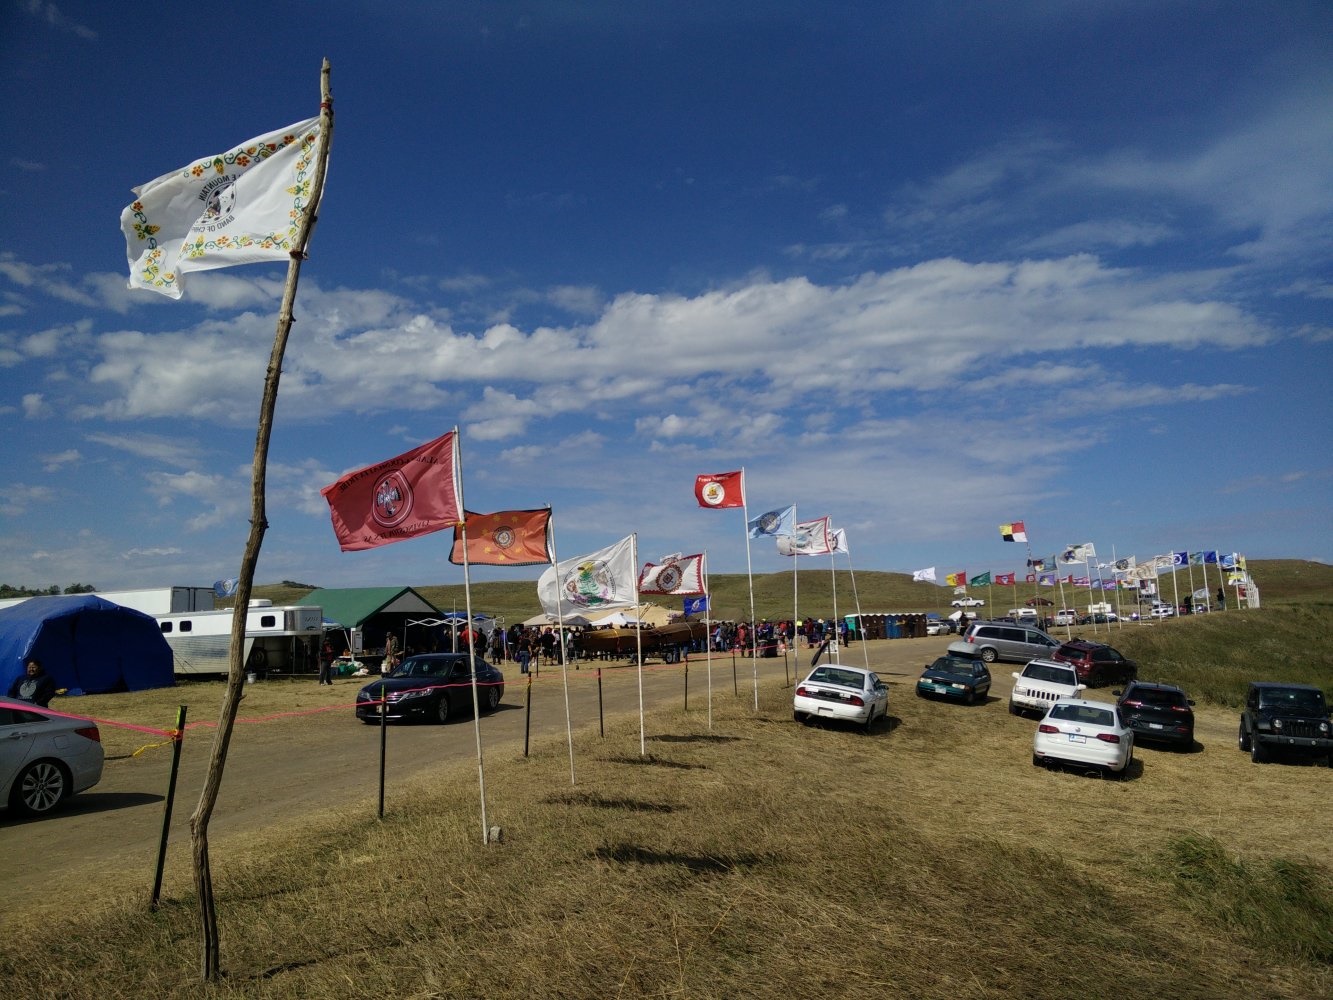 In 2015, thousands gathered in North Dakota to demonstrate against the Dakota Access pipeline in the year’s most visible public protest in the United States. Opponents of the Keystone XL pipeline are preparing to renew the fight against a suddenly revived project. Photo courtesy of Creative Commons